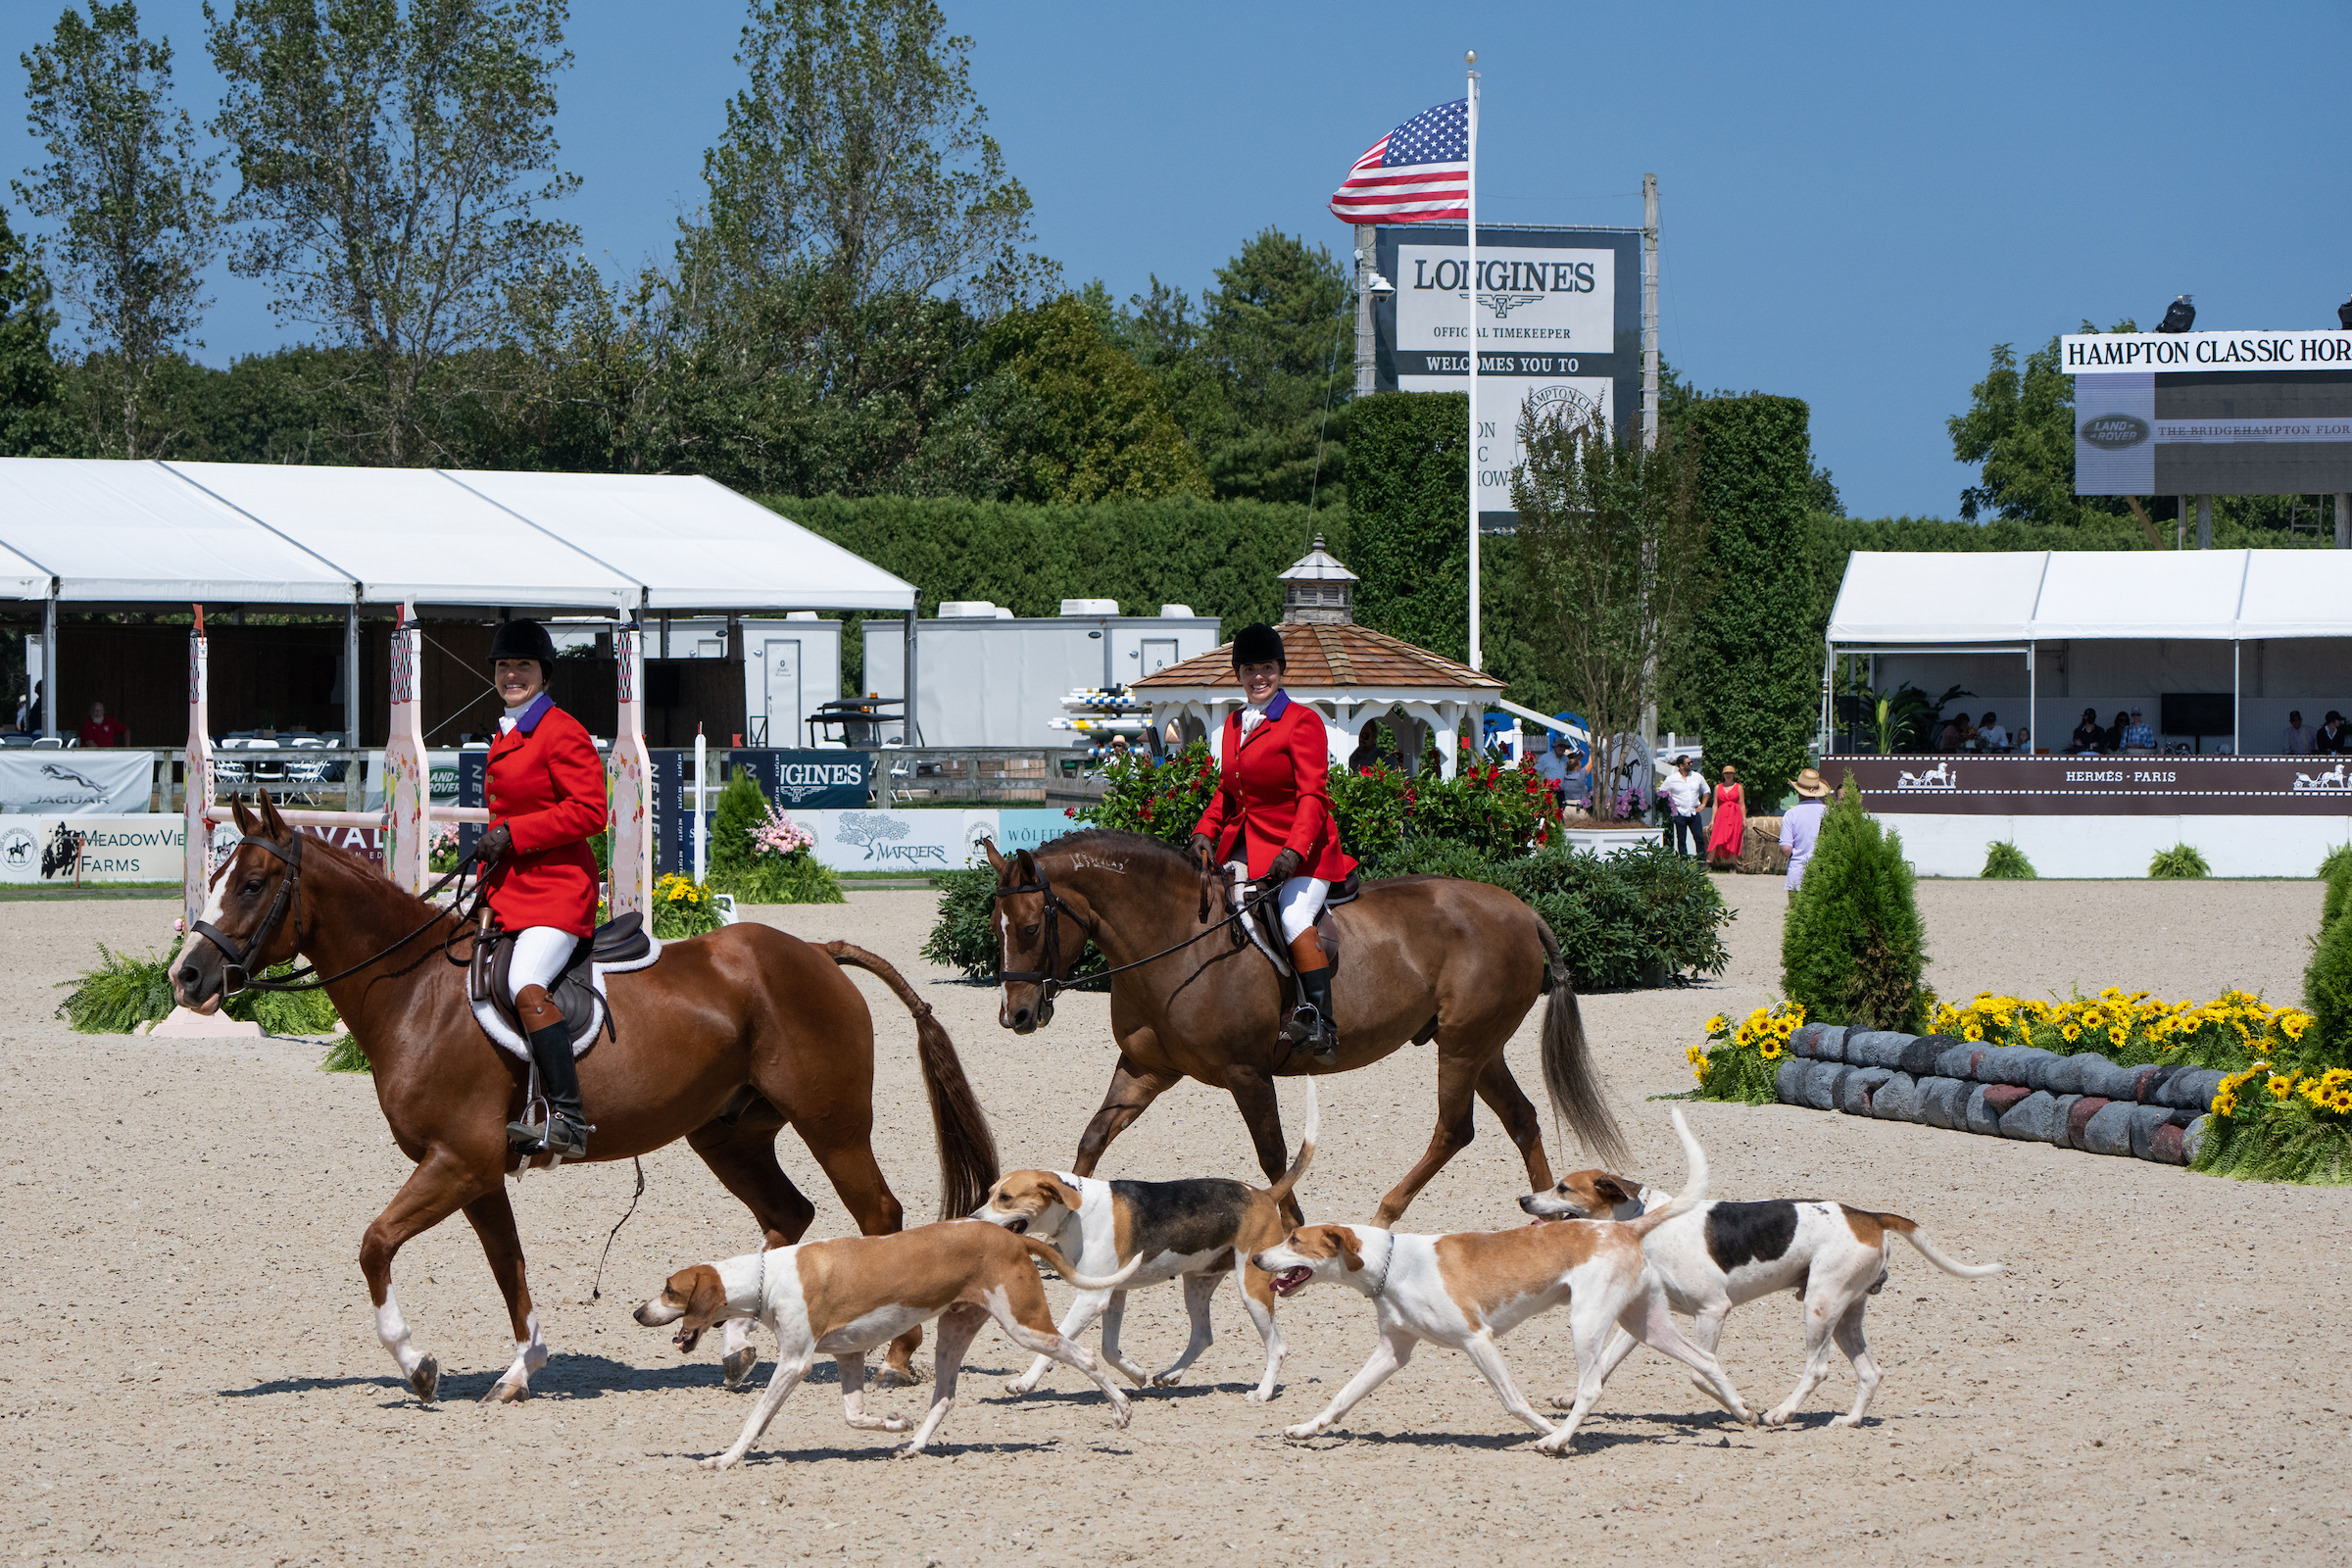 Members of the Smithtown Hunt, founded in 1900, were part of the Opening Day festivities on the newly revamped Grand Prix field on Sunday. LORI HAWKINS PHOTOS